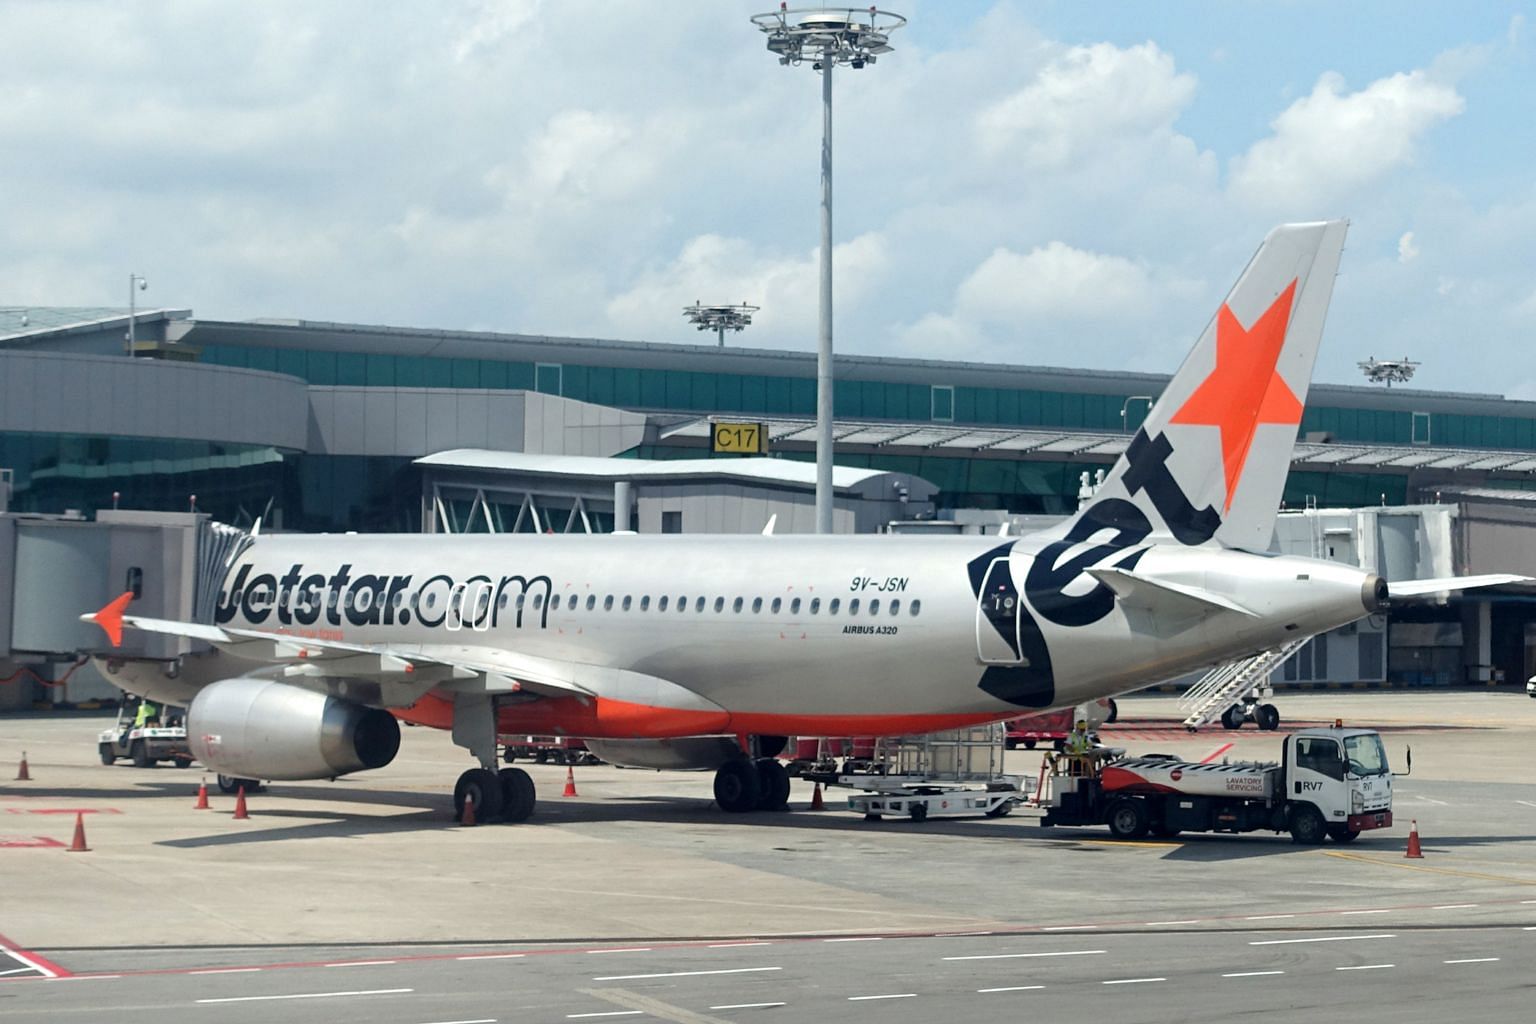 Australia&#39;s Jetstar flights cancelled as unions plan further strike action,  Australia/NZ News &amp; Top Stories - The Straits Times